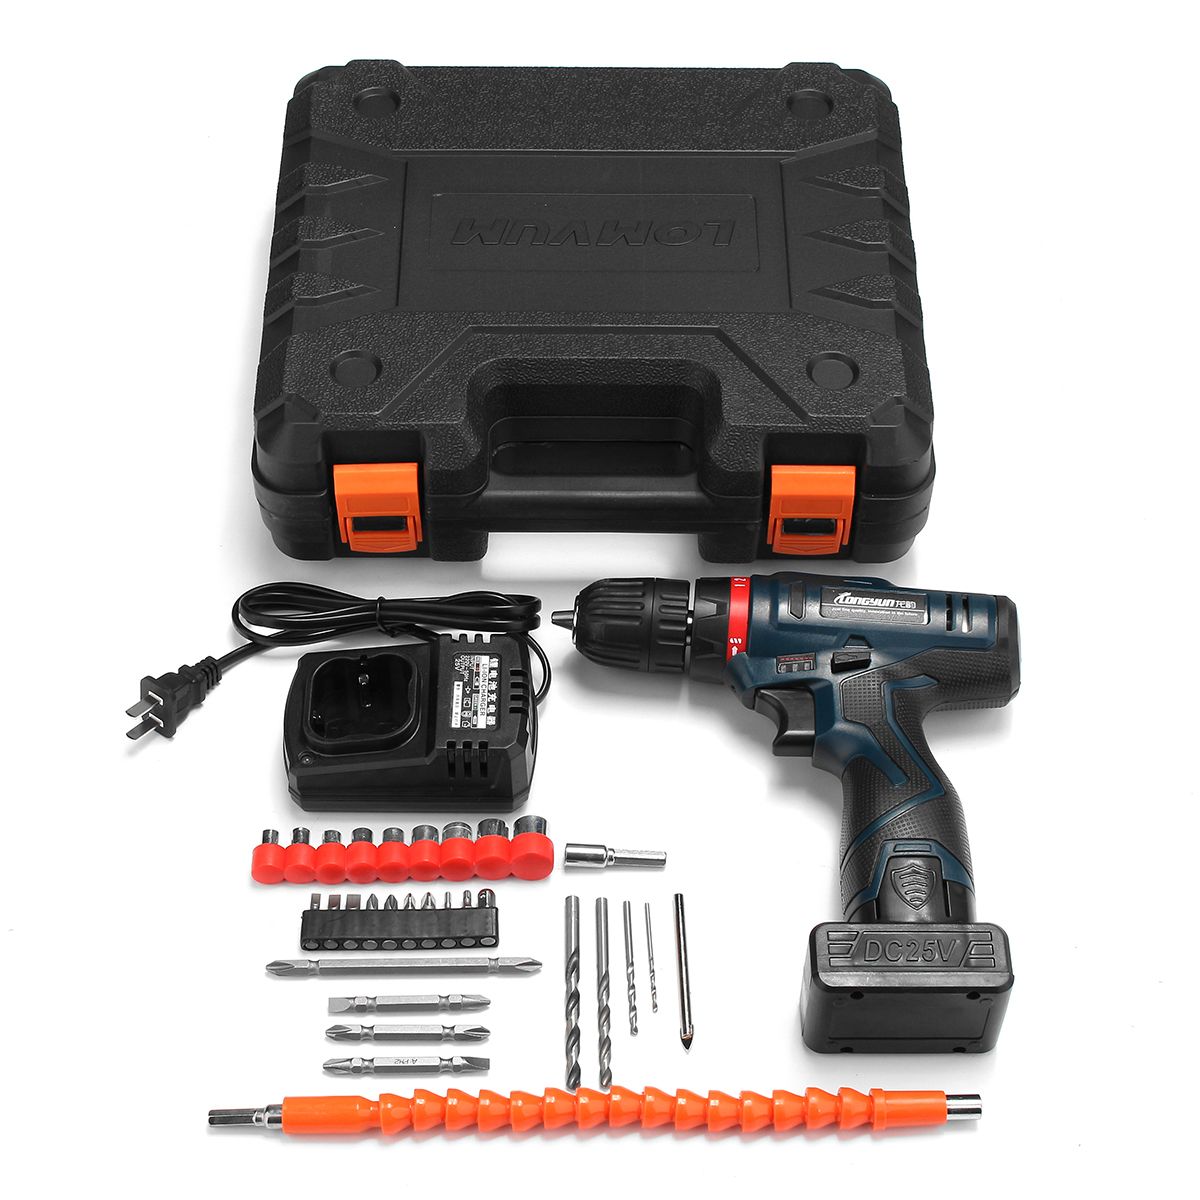 25V-Li-Ion-Cordless-Electric-Hammer-Power-Drill-Driver-Hand-Kit-2-Speed-LED-Waterproof-1248611